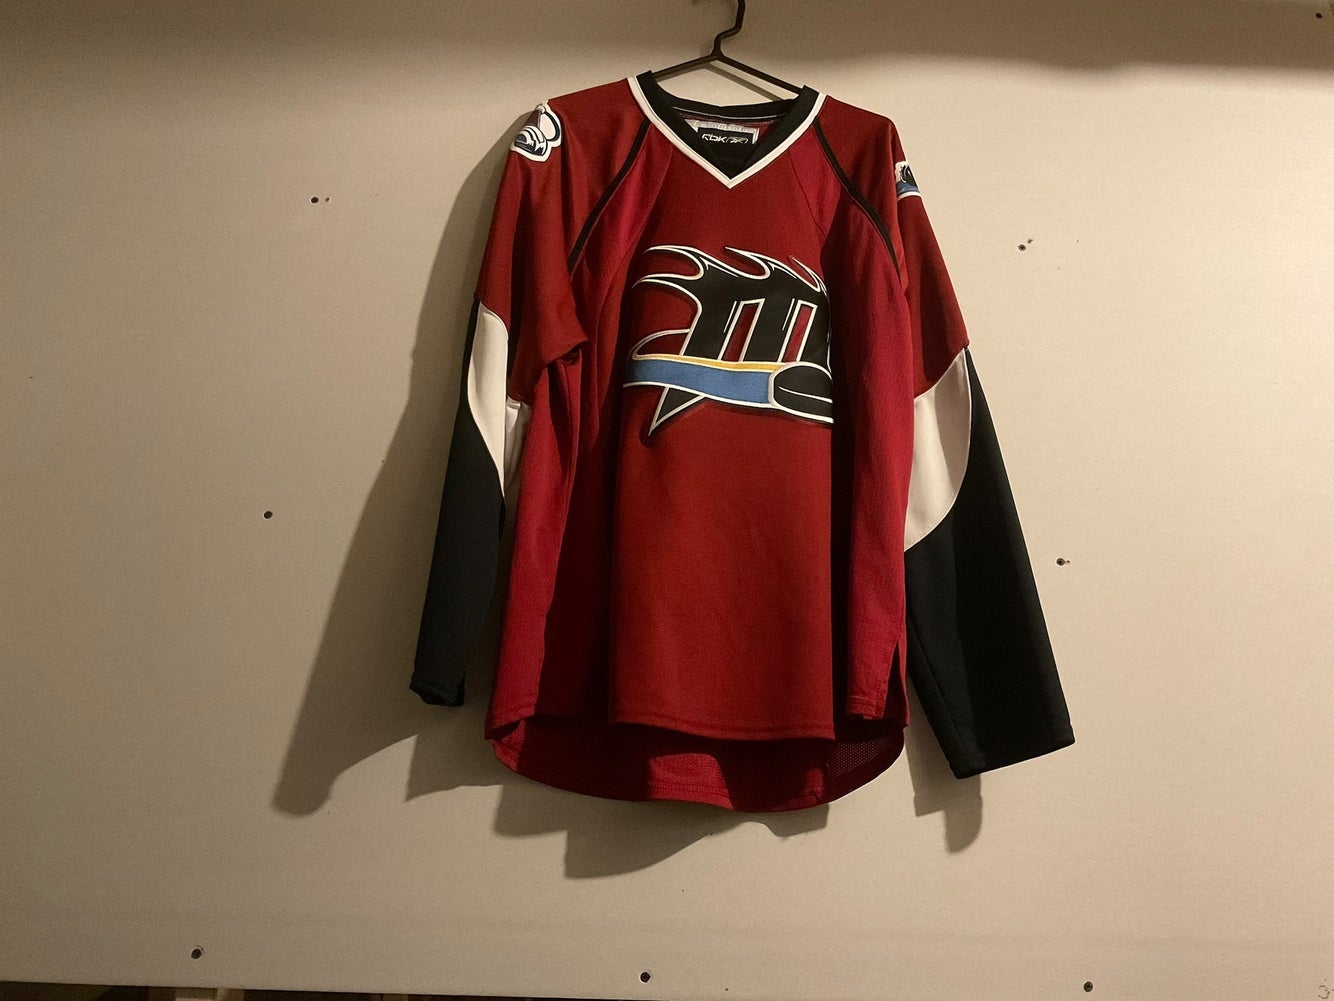 Lake Erie Monsters Unveil New Jerseys For Season to Begin